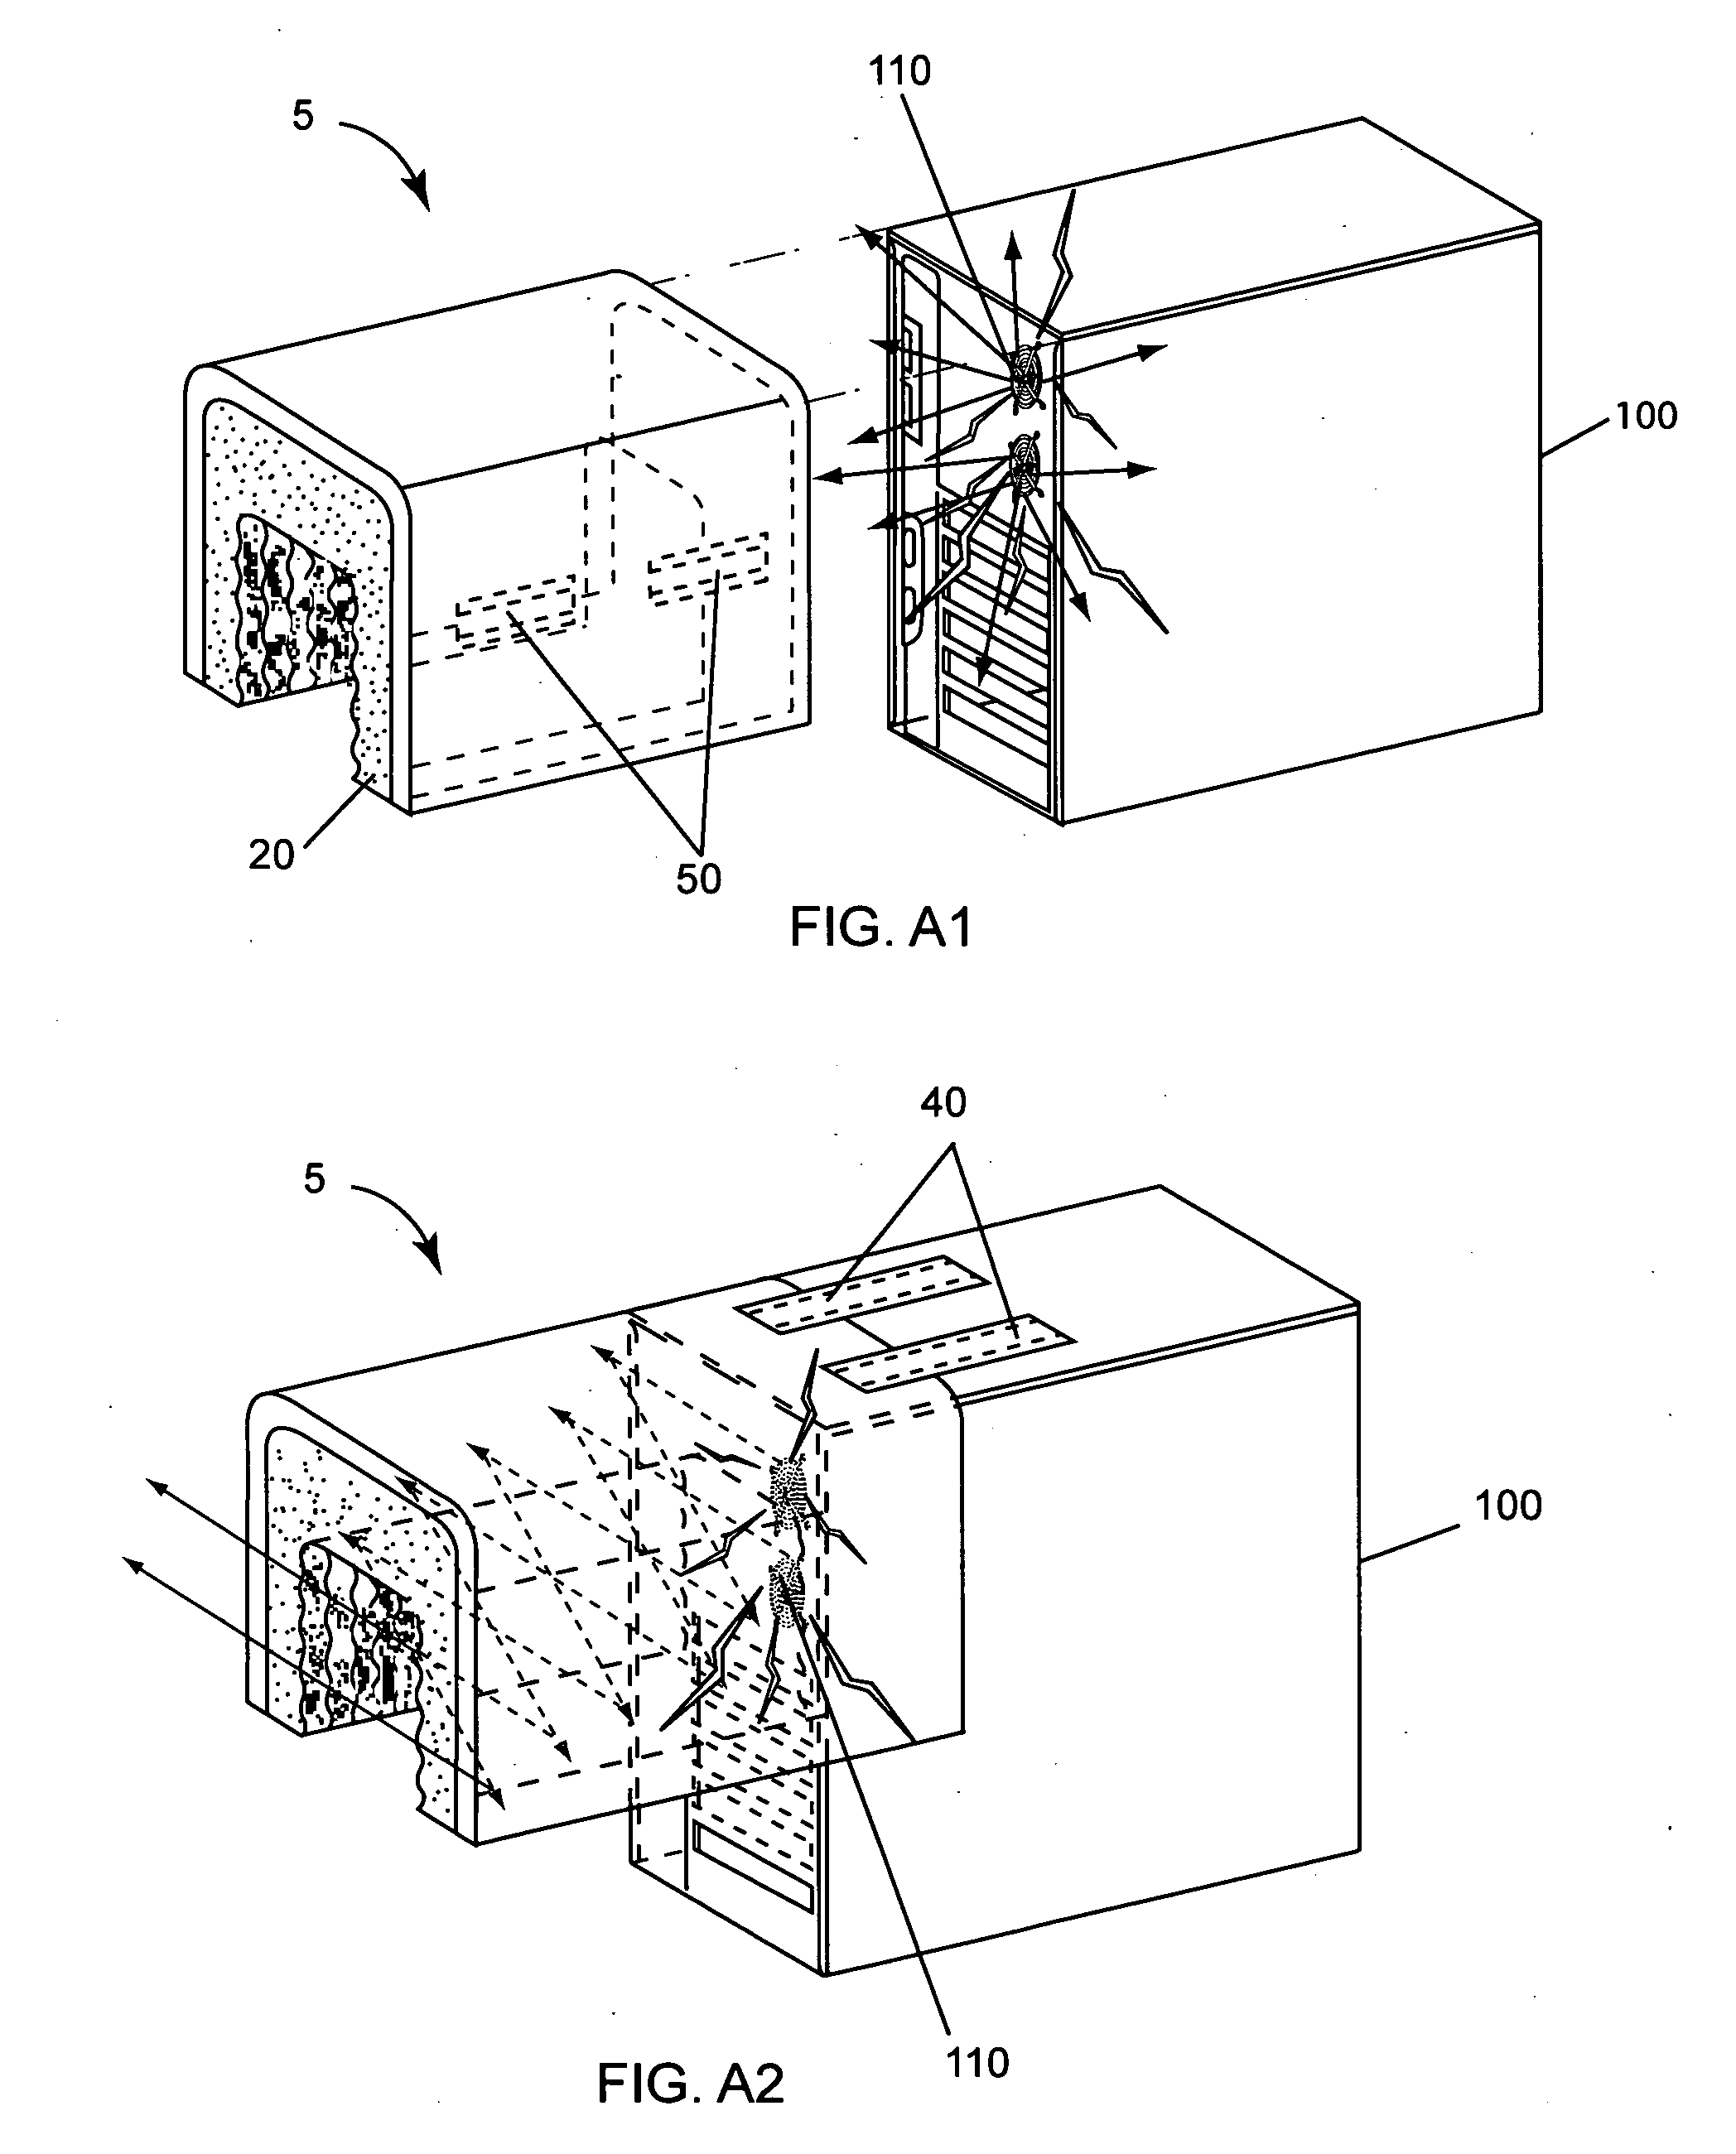 Acoustic noise reduction apparatus for personal computers and electronics